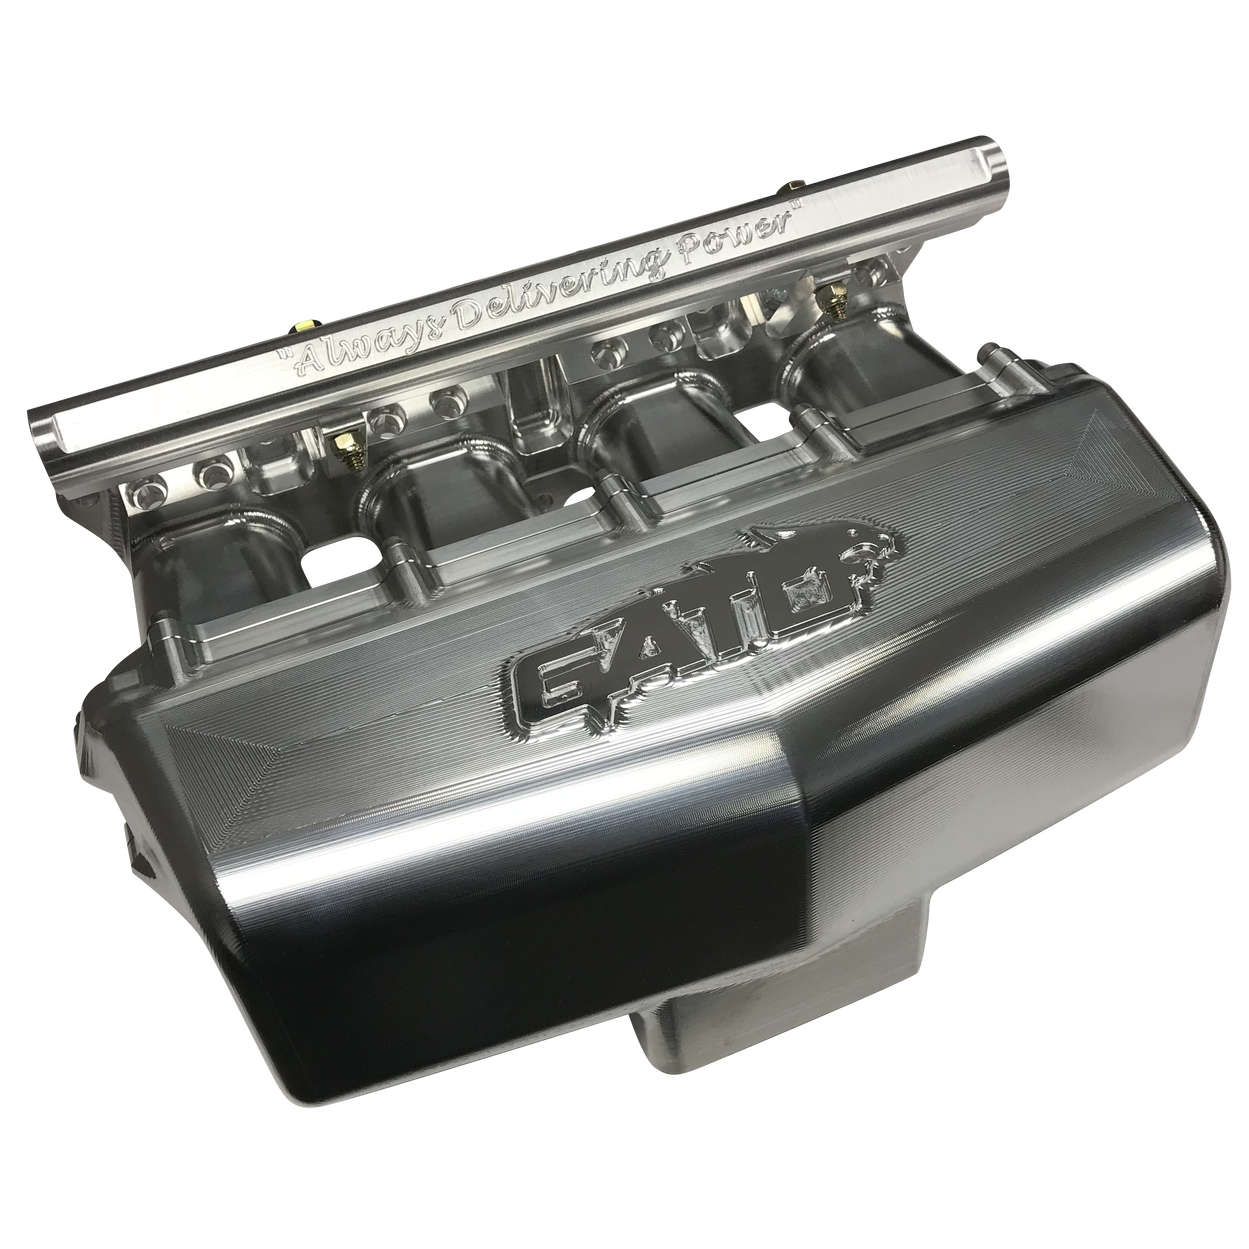 K-SERIES BILLET INTAKE MANIFOLD FROM GATO PERFORMANCE (4 OR 8 INJECTOR)